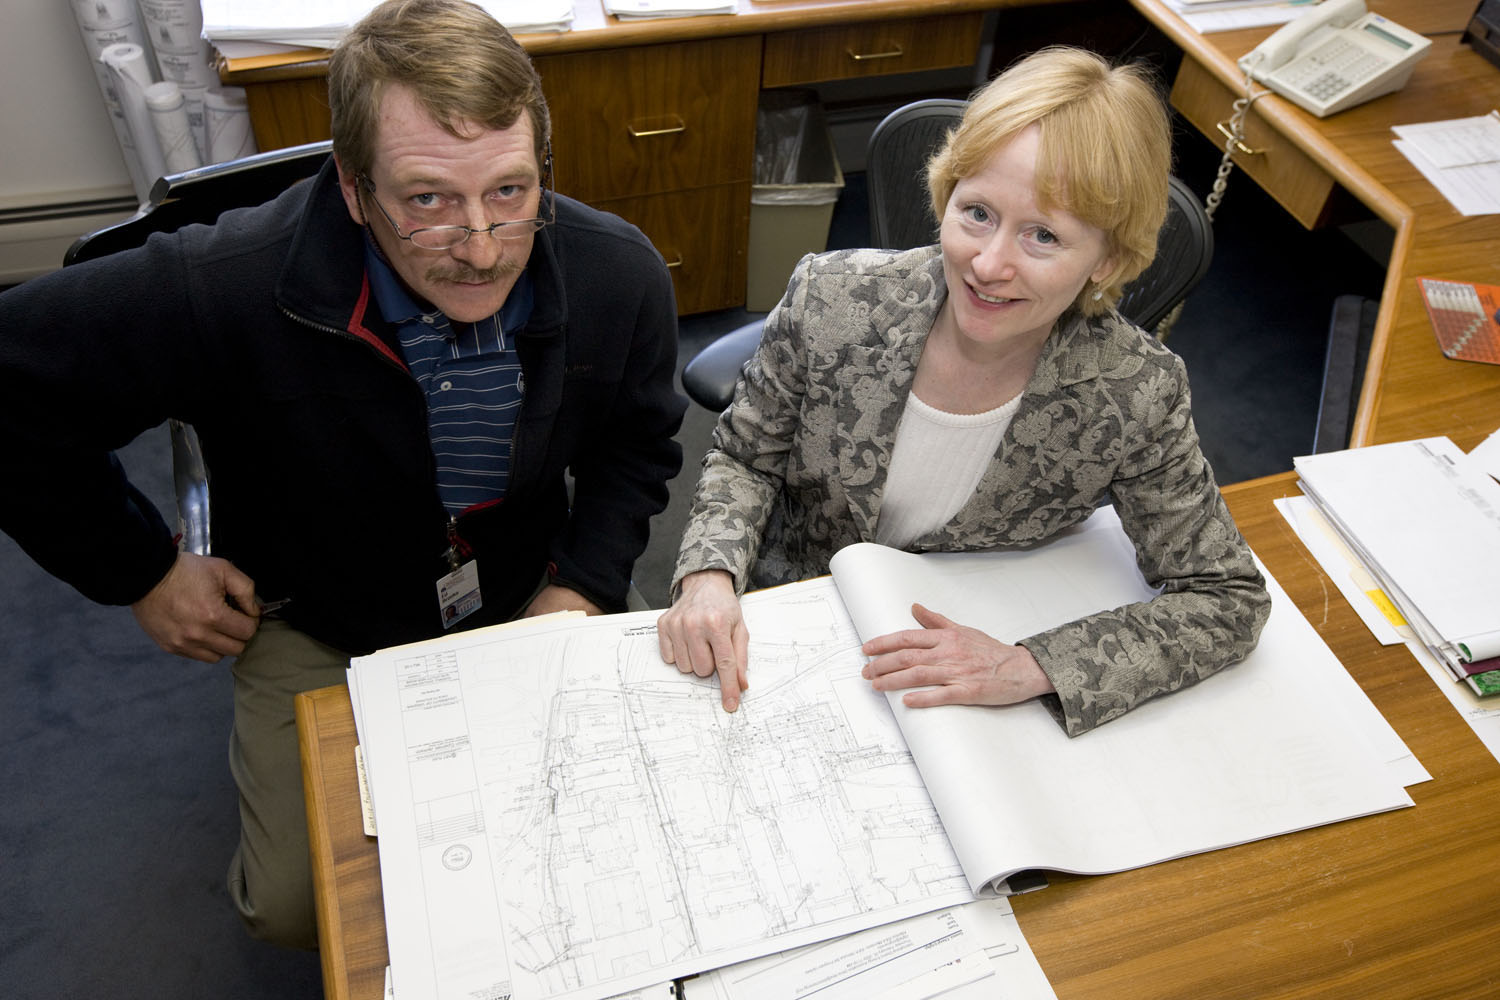 Cheryl Gomez and Ed Brooks looking at architectural drawings together